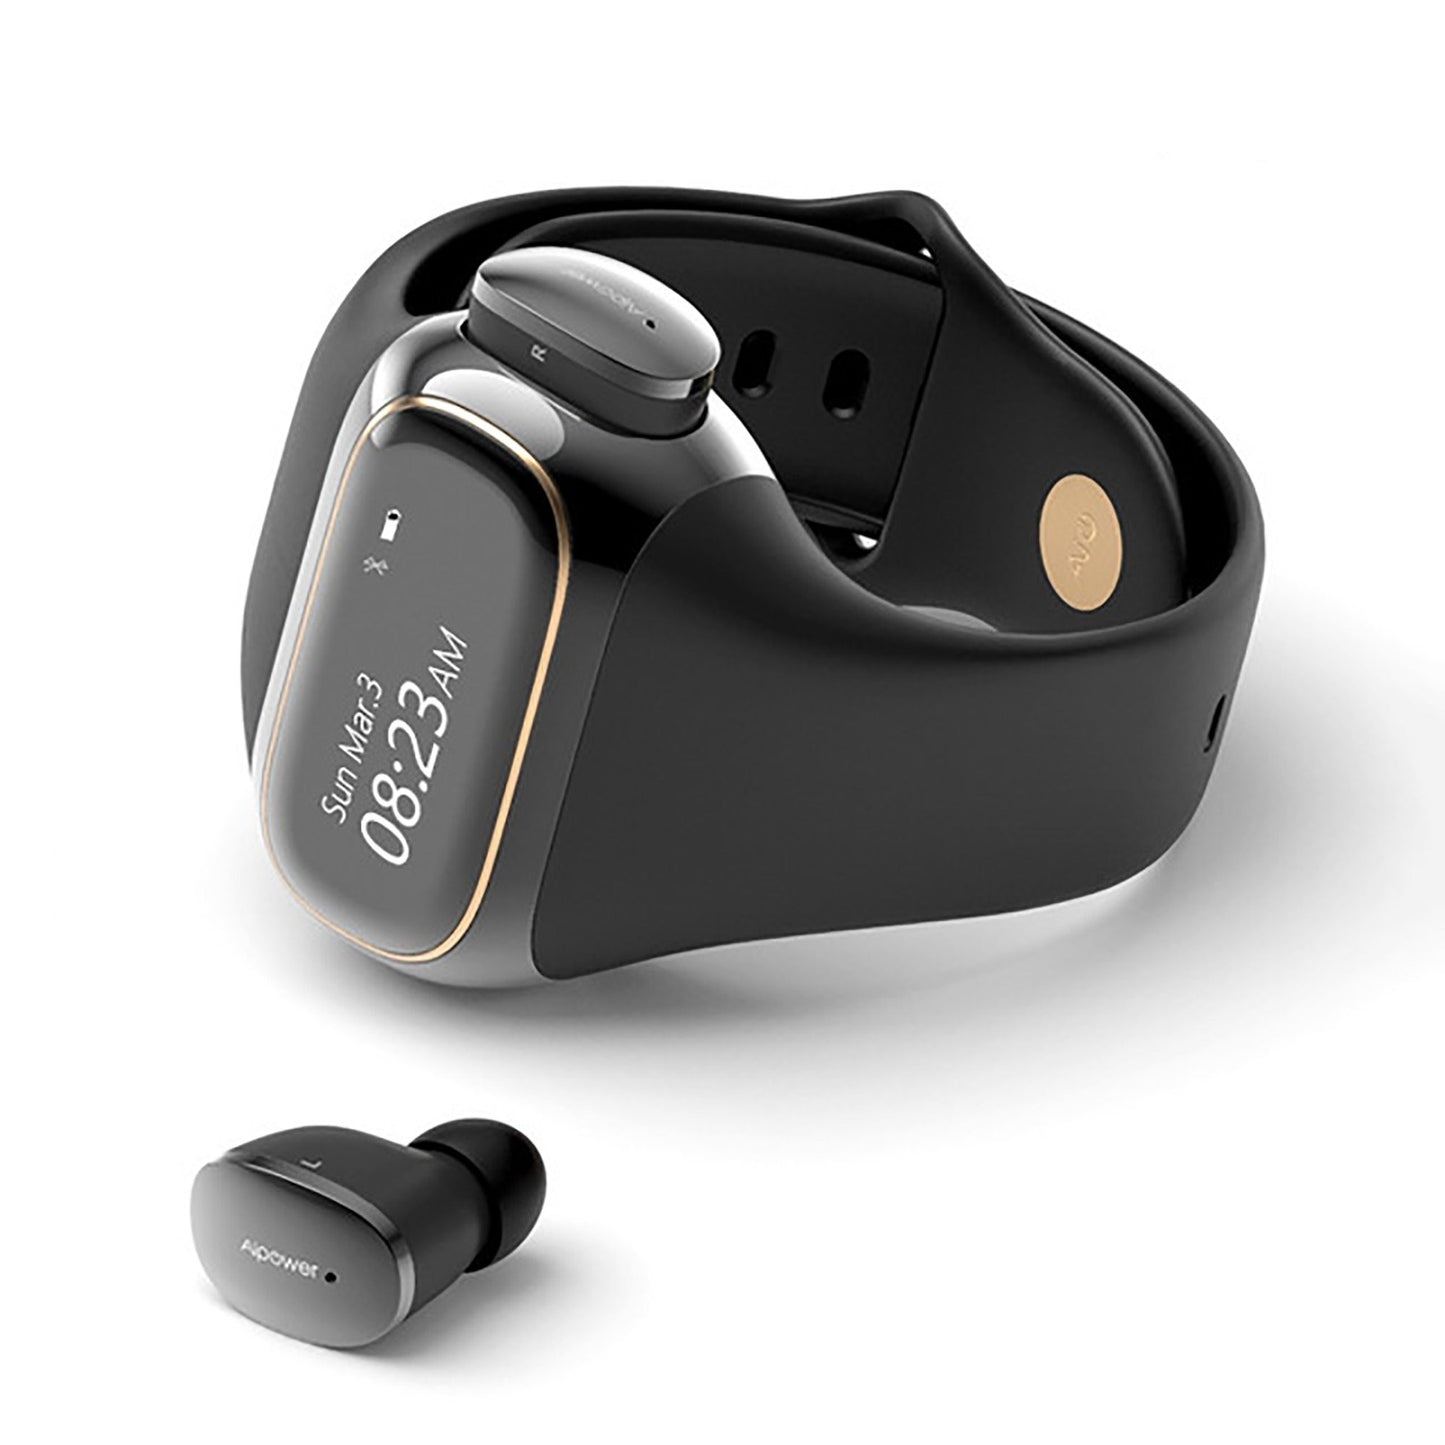 Wearbuds Fitness Tracker 2 In 1 With Bluetooth and Calling